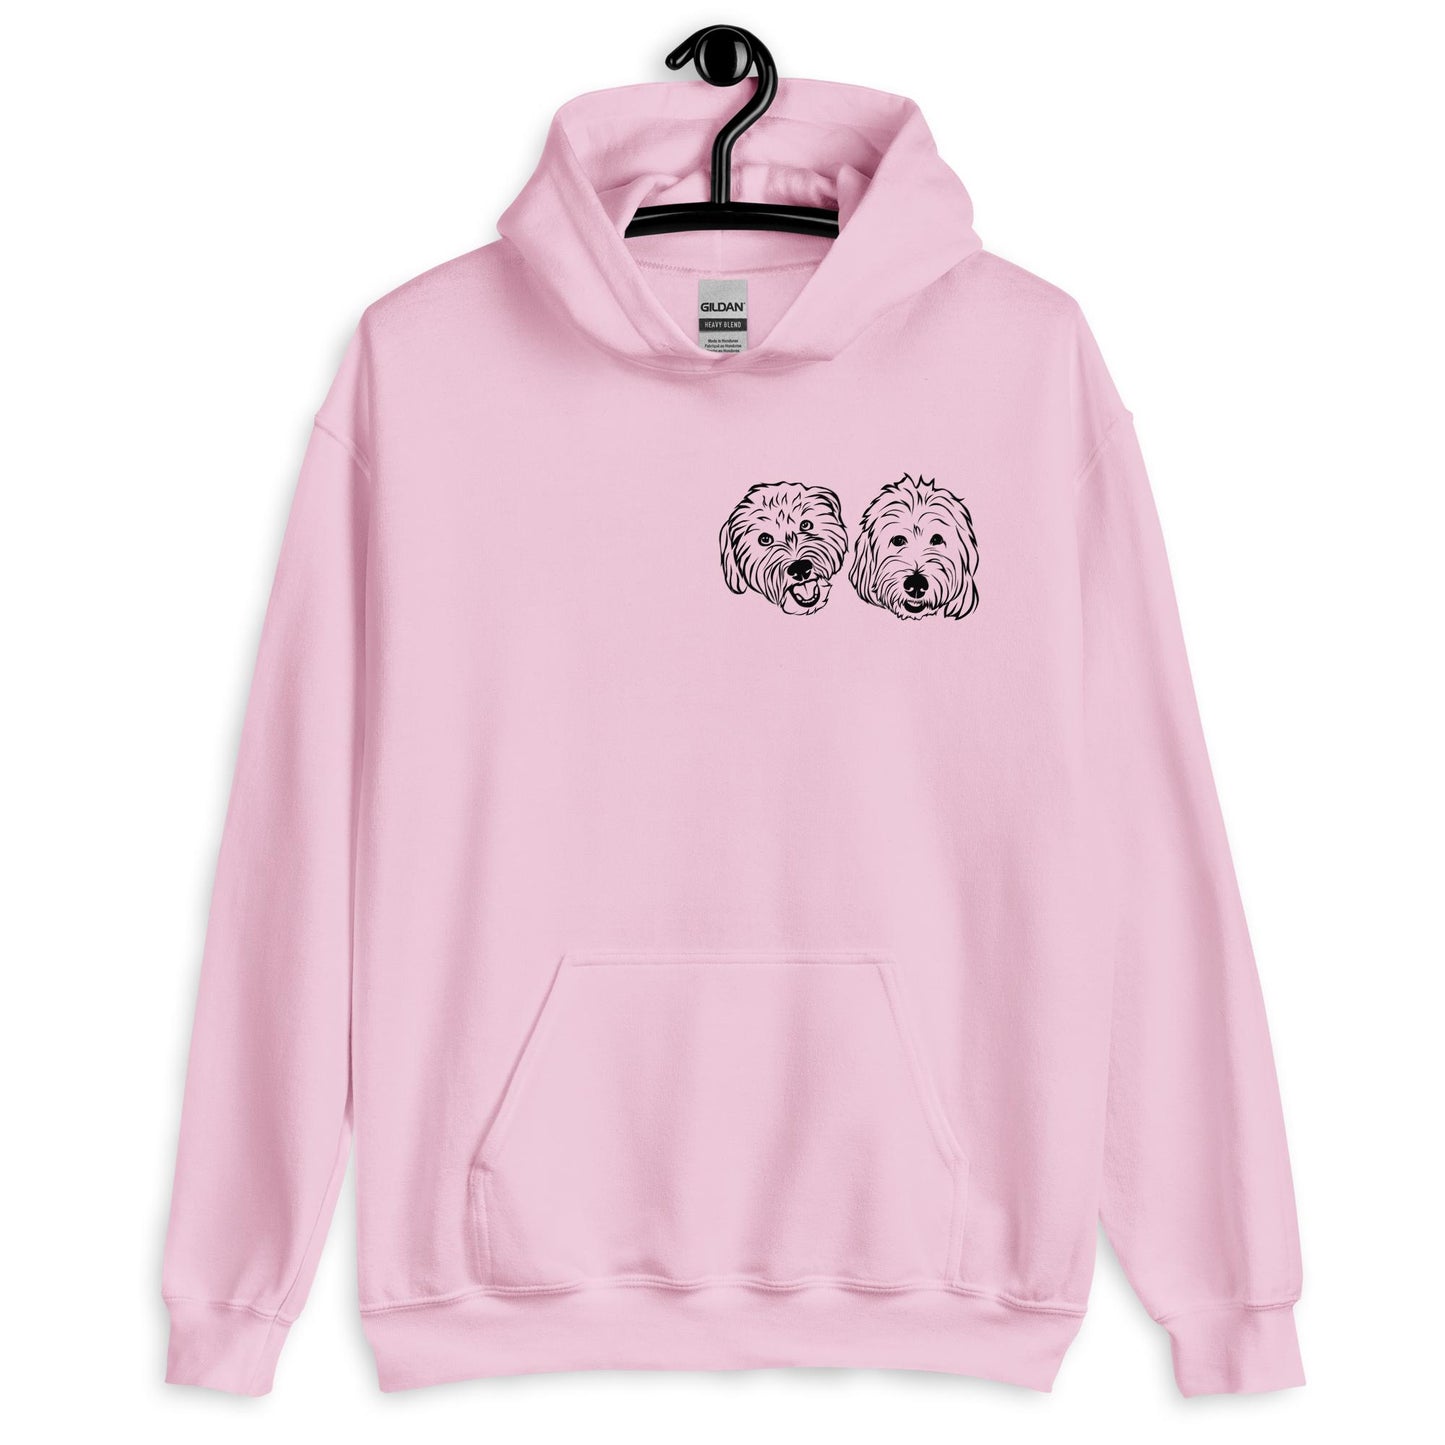 Hoodie Sweatshirt | Personalized Line Art with TWO Dog Faces!